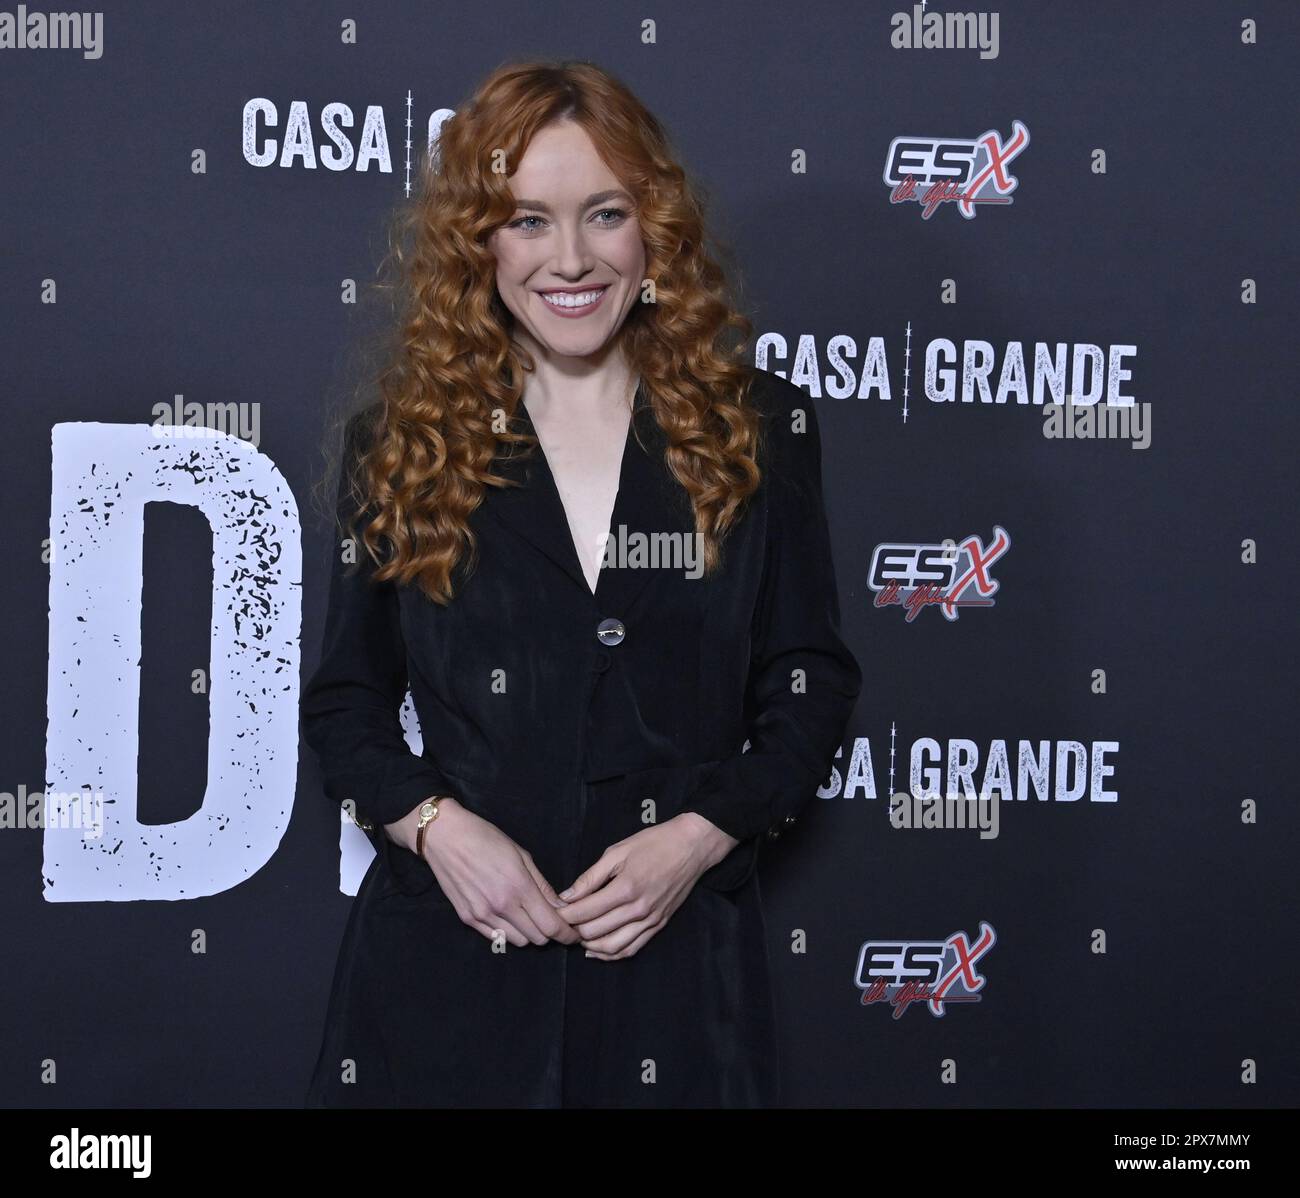 Burbank, United States. 01st May, 2023. Cast member Madison Lawlor attends the premiere of Prime Video's TV series drama "Casa Grande" at Warner Bros. Studios in Burbank, California on Monday, May 1, 2023. Storyline: Follows several families in the farmland of Northern California as it navigates universal themes of class, immigration, culture and family. Photo by Jim Ruymen/UPI Credit: UPI/Alamy Live News Stock Photo